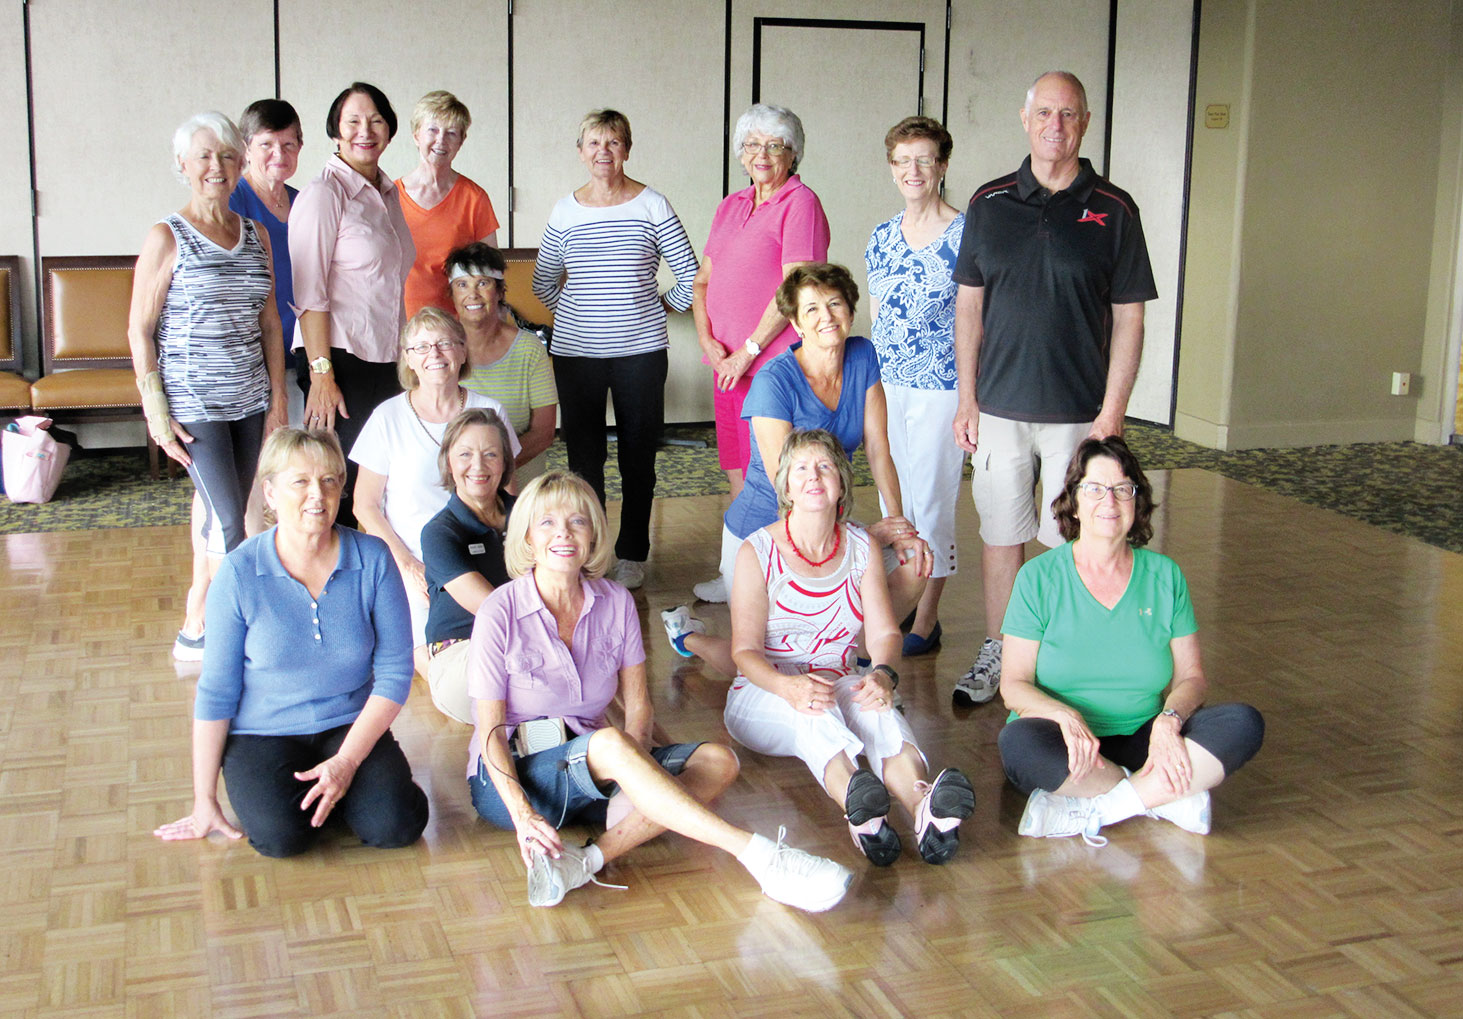 Tuesday morning classes have been rambunctious this summer. This great group dances to a lyric that states, “I like my men like my coffee, Hot, Strong and Sweet.” Seven dances in four weeks; the pace and step numbers are energizing--even in the humidity.